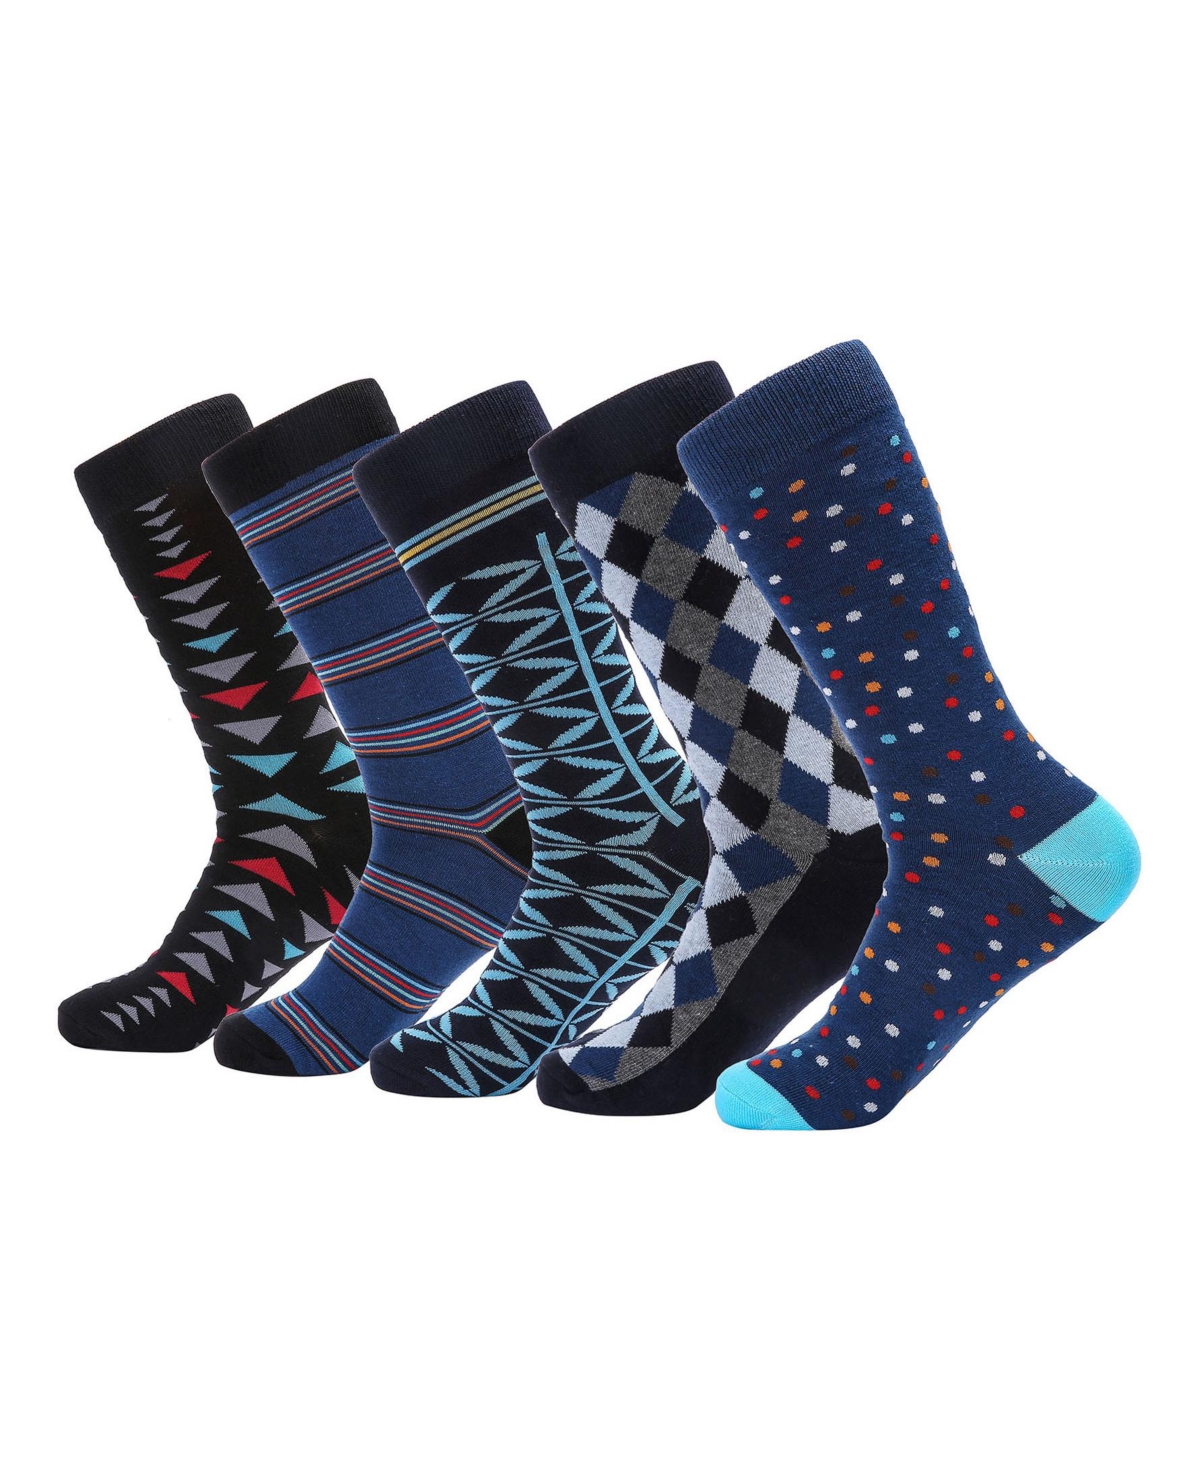 Men's Exceptional Evening Crew Socks 5 Pack - Exceptional evening